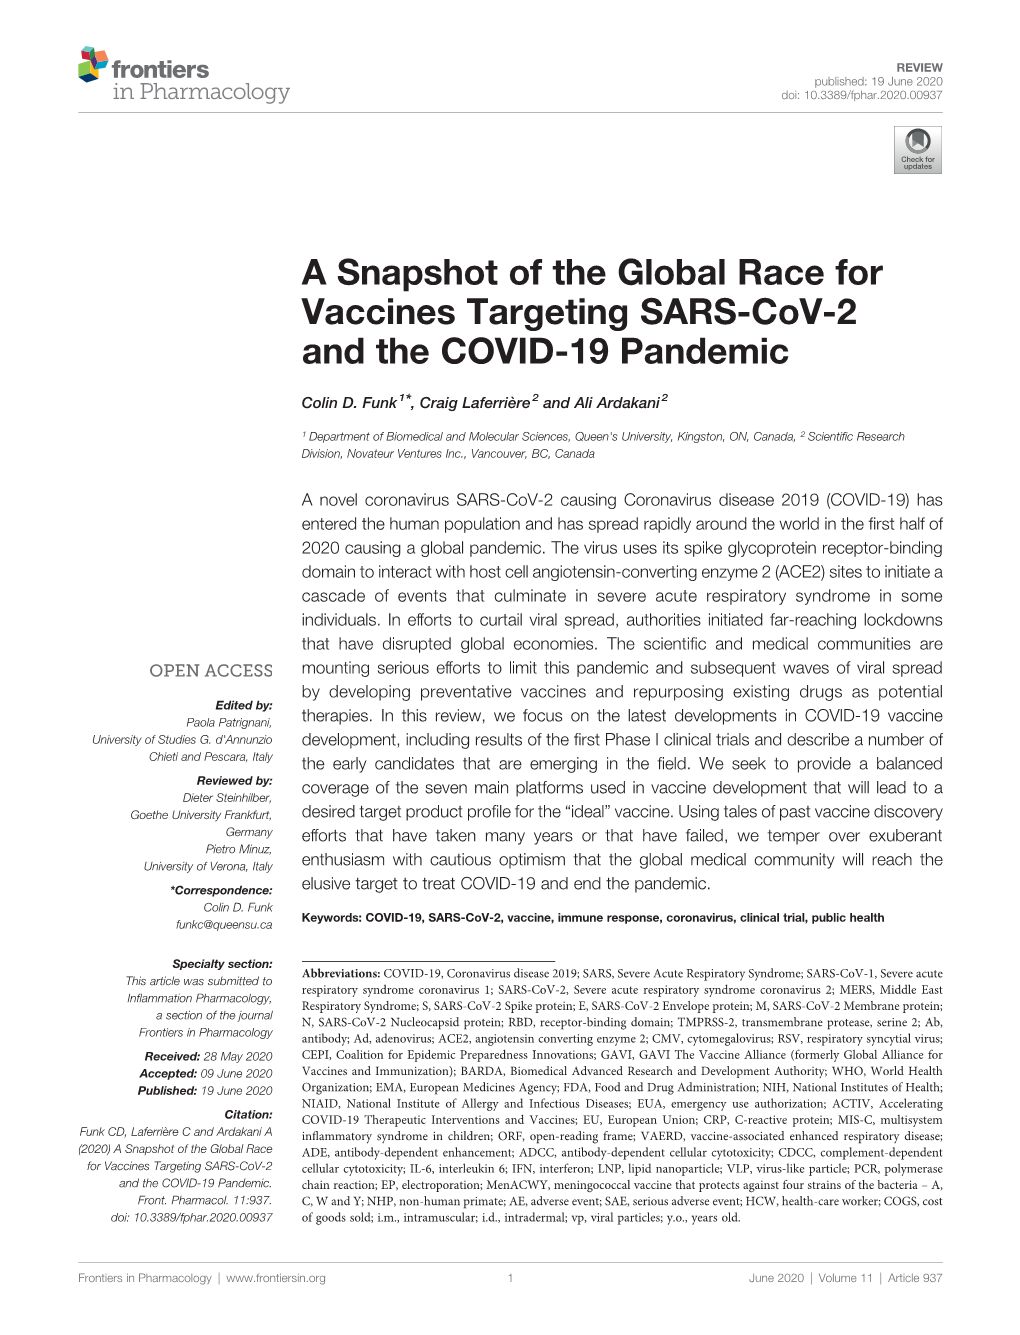 A Snapshot of the Global Race for Vaccines Targeting SARS-Cov-2 and the COVID-19 Pandemic